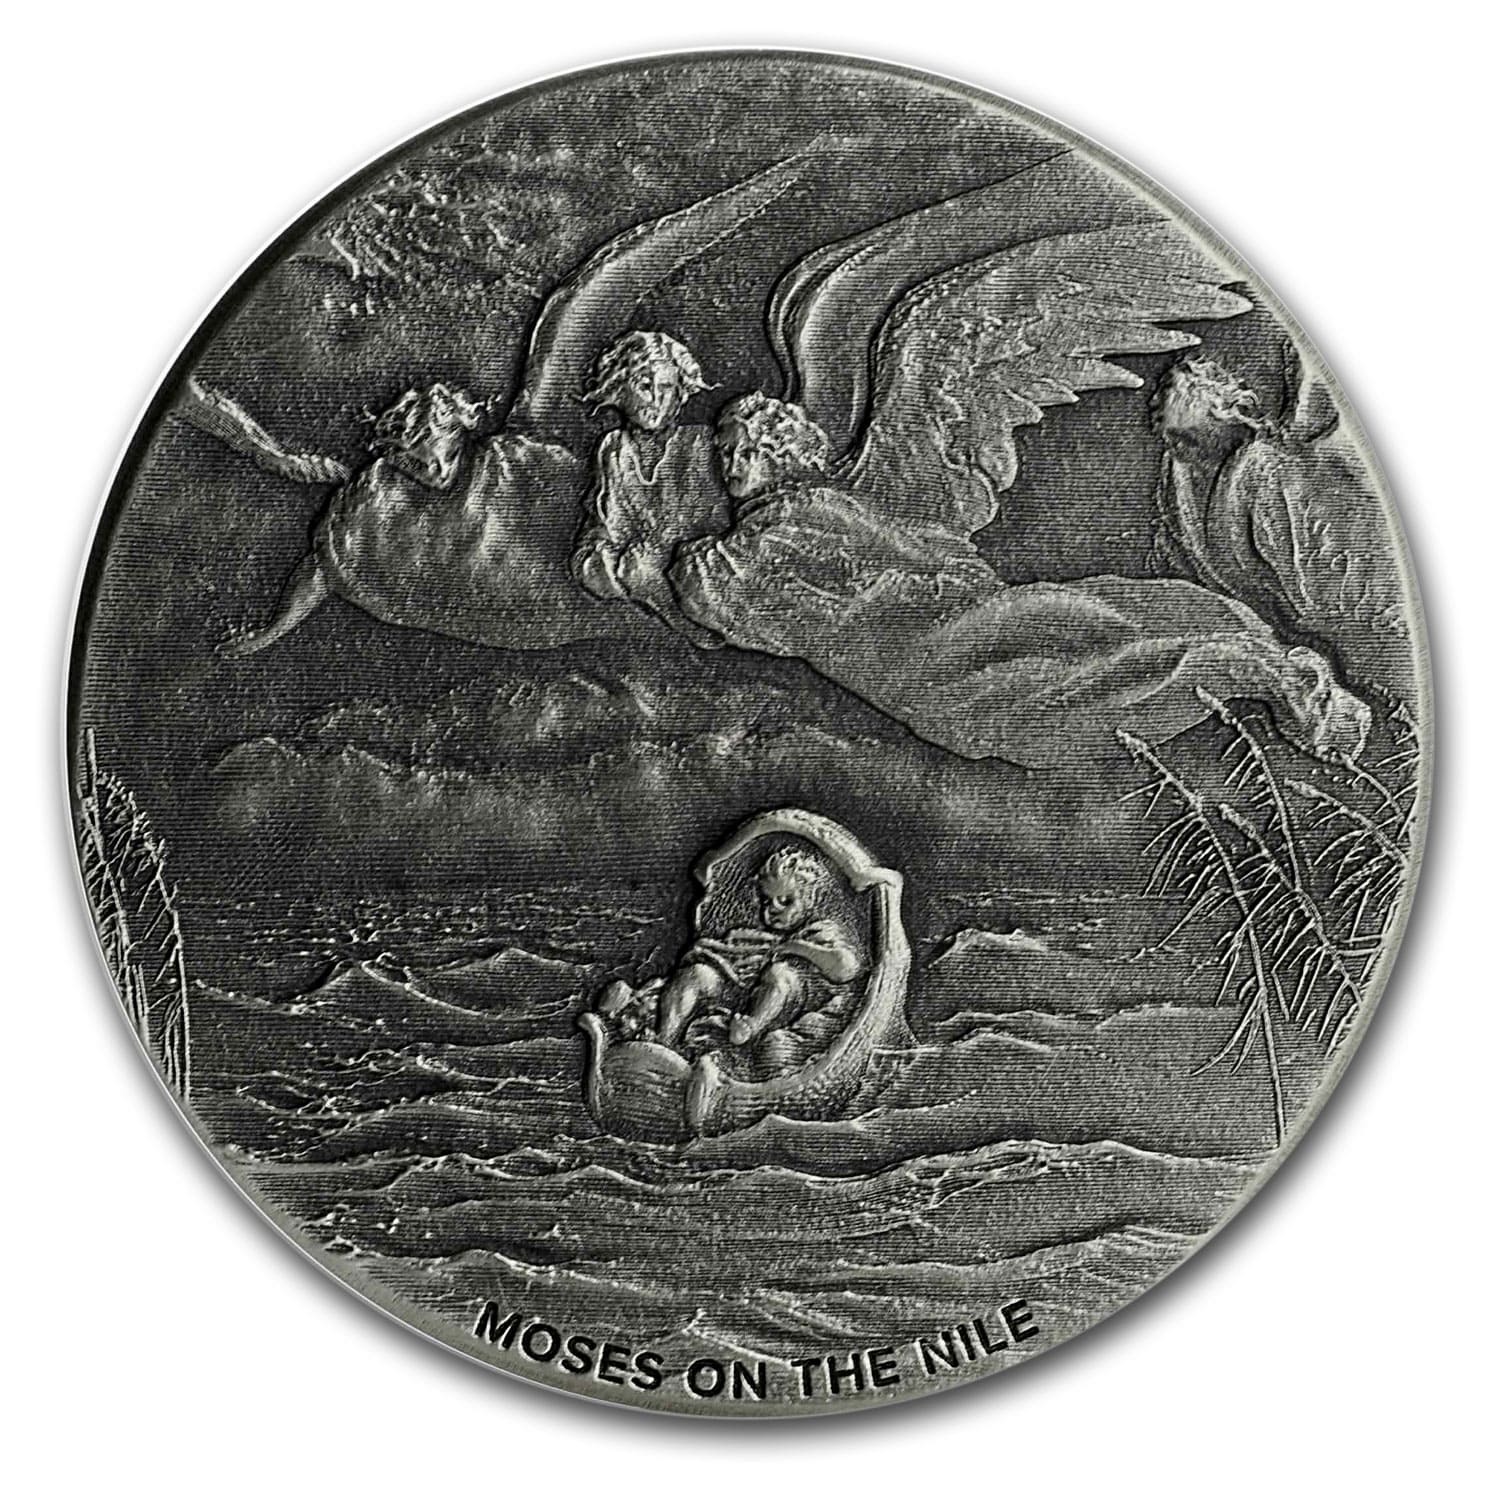 Buy 2019 2 oz Silver Coin - Biblical Series (Moses on the Nile)